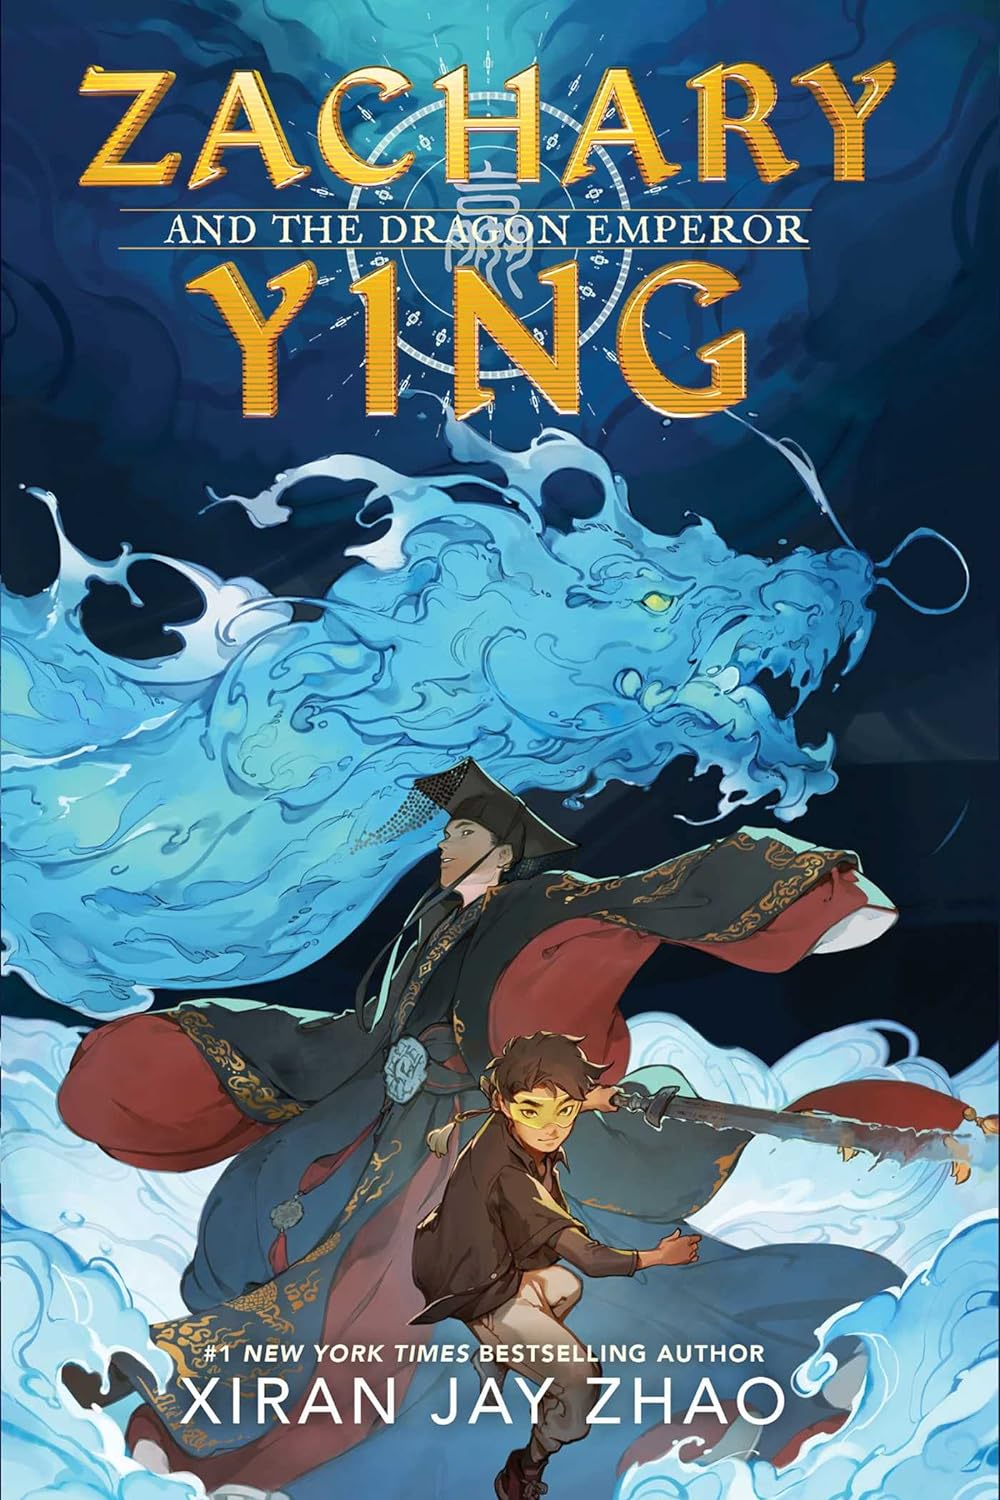 Image for "Zachary Ying and the Dragon Emperor"